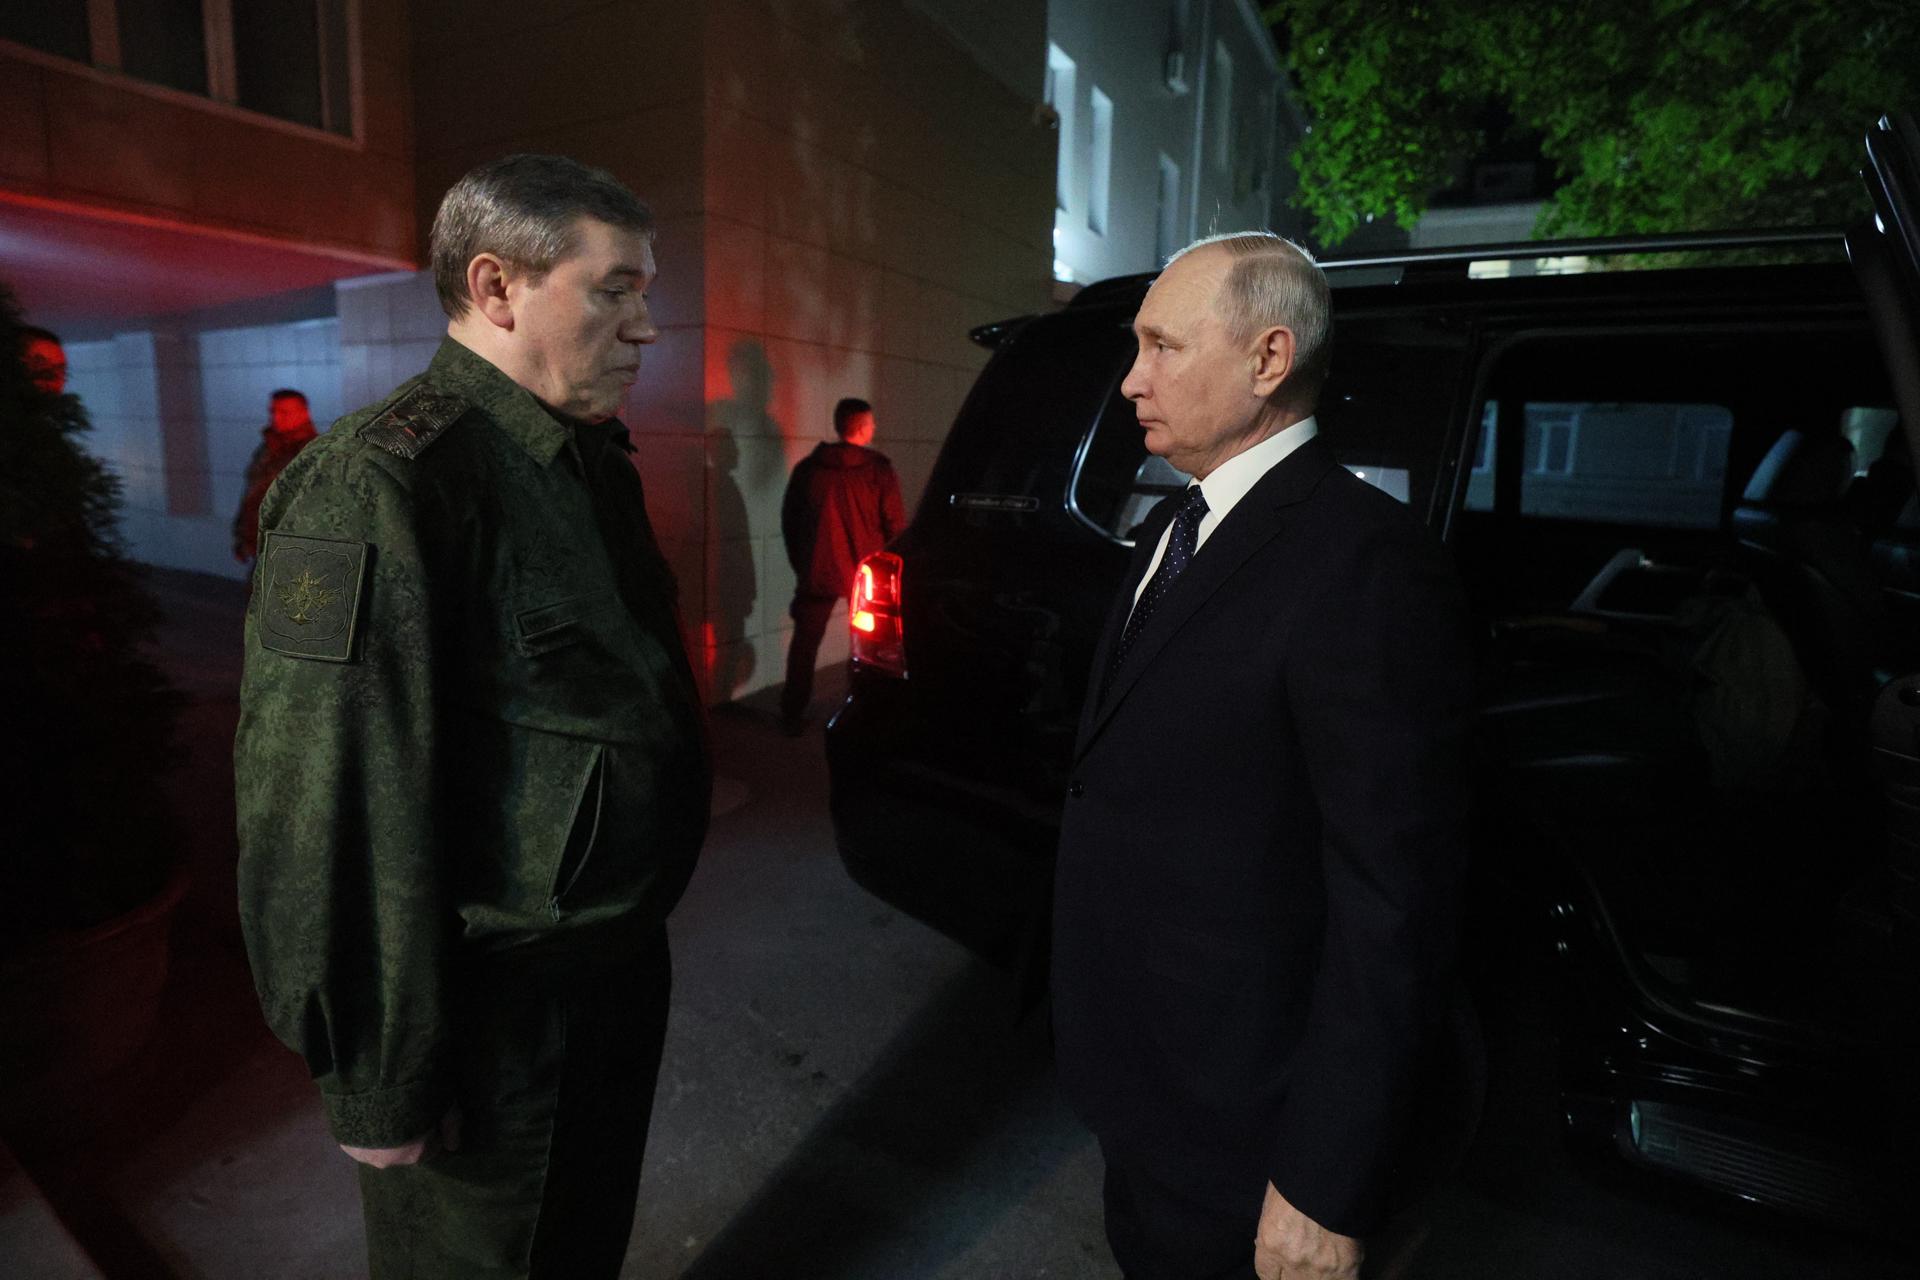 Russian President Vladimir Putin (R) meets with chief of the General Staff of the Armed Forces of the Russian Federation Valery Gerasimov walk in the headquarters of the Russian Armed Forces in Rostov-on-Don, Russia, 20 October 2023. EFE/EPA/GAVRIIL GRIGOROV/KREMLIN / POOL MANDATORY CREDIT